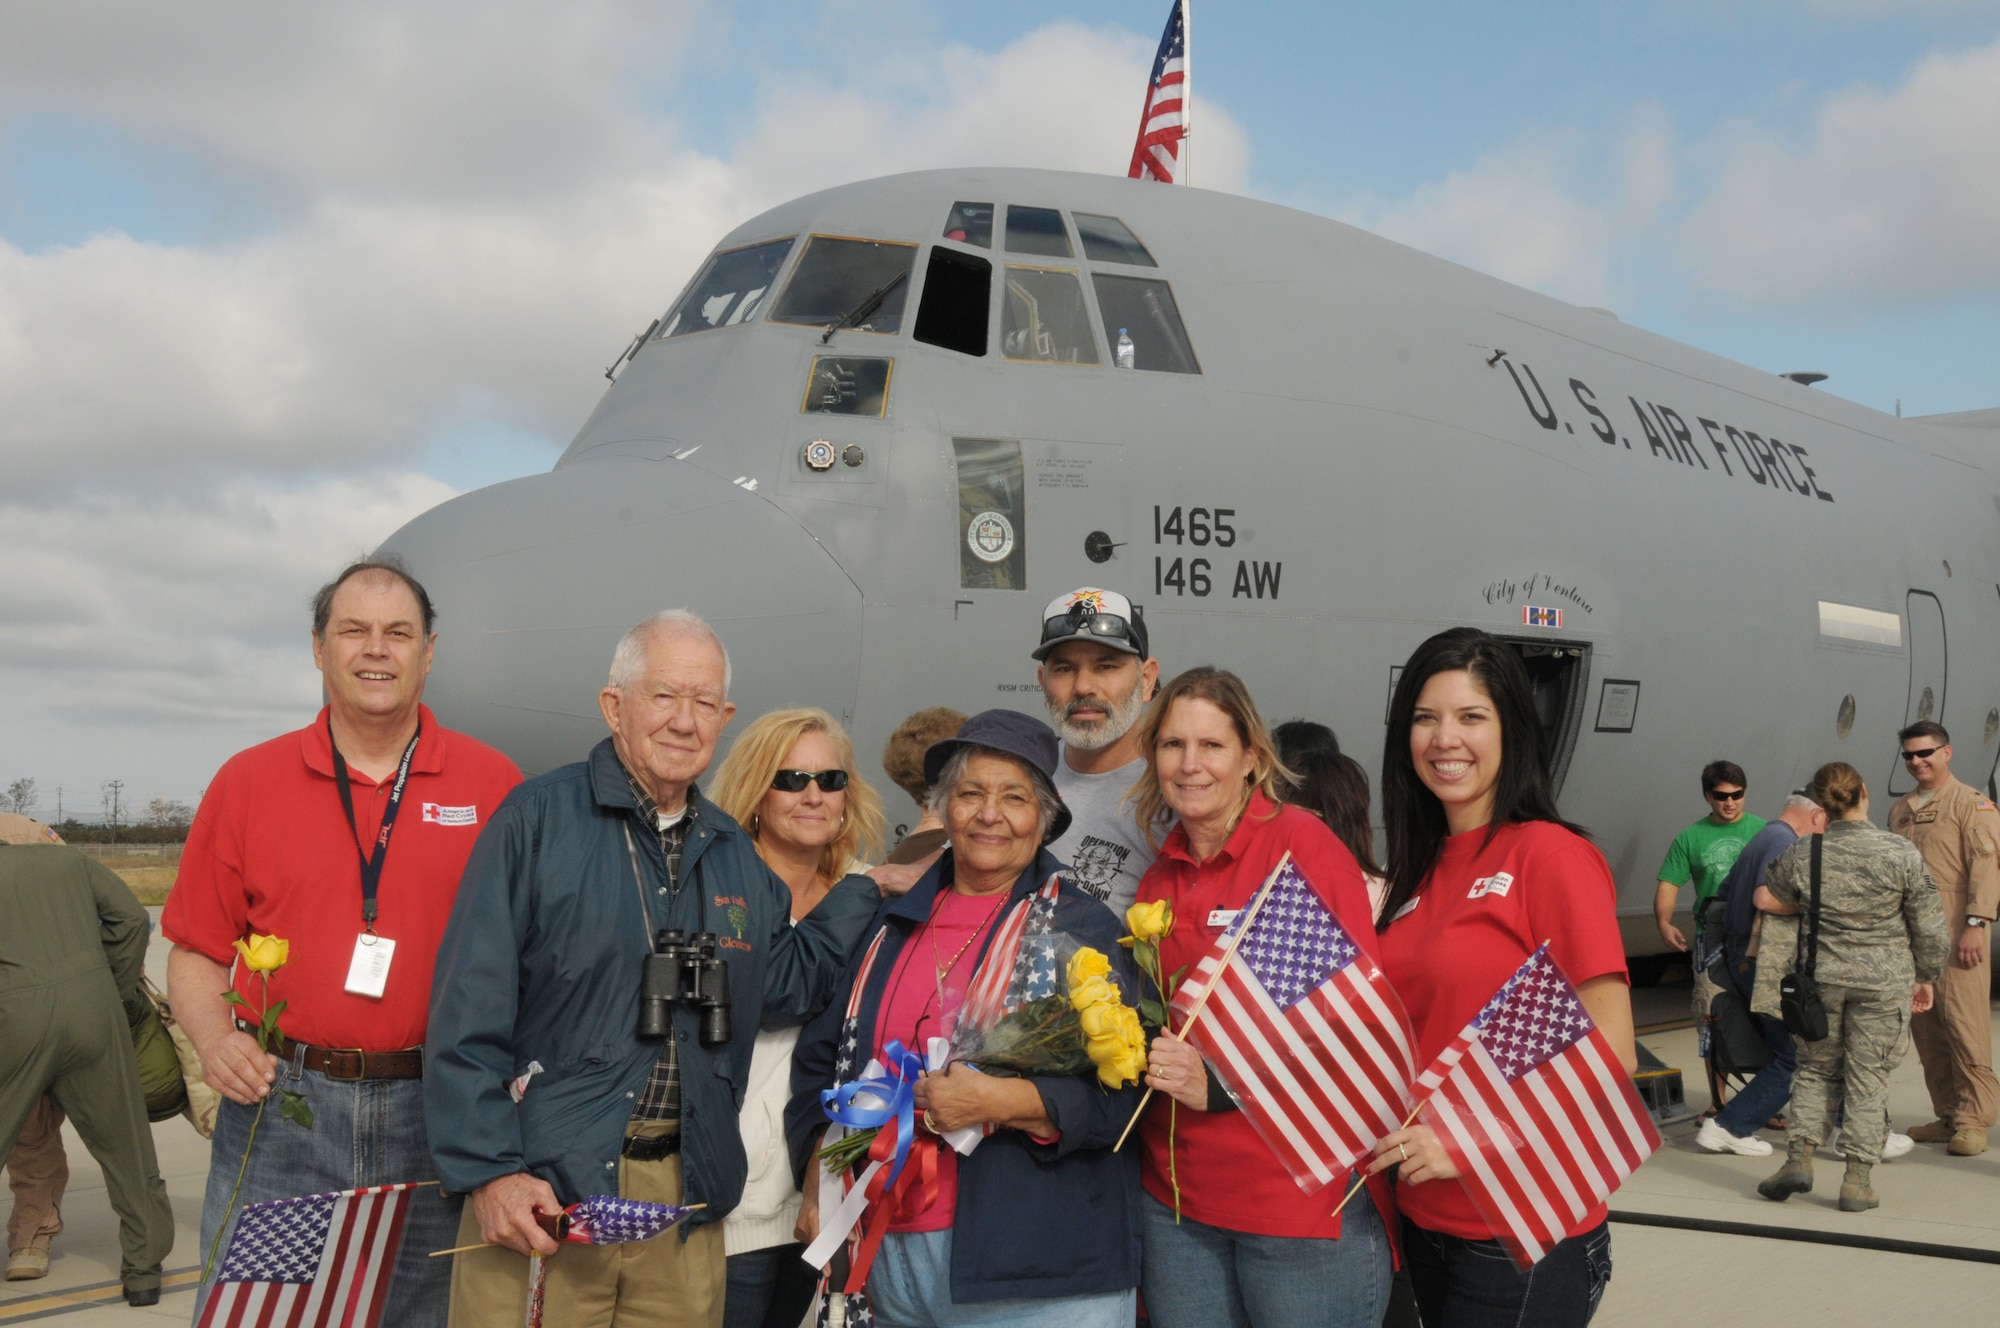 Members of the local Red Cross pose in front of a C 130 that brought home members of the 146th Airlift Wing that returned from an overseas deployment at Channel Islands Air National Guard Station on November 23, 2011. The Red Cross was on hand to welcome home airmen returning from a 90 day AEF rotation in Afghanistan. 